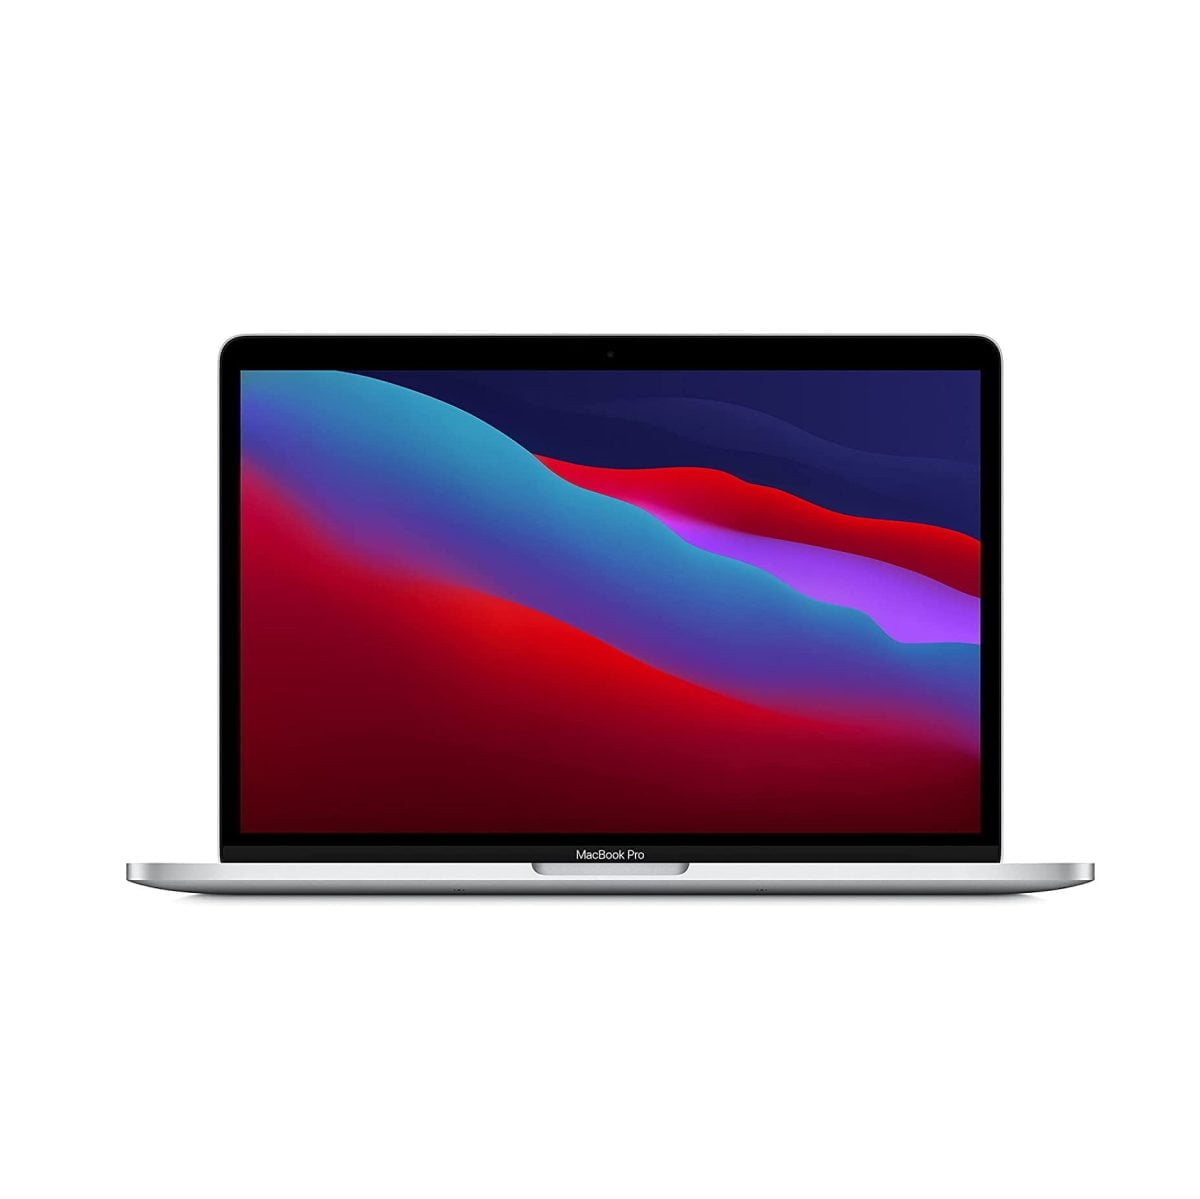 Silver 1 Apple &Amp;Lt;H1 Id=&Amp;Quot;Title&Amp;Quot; Class=&Amp;Quot;A-Size-Large A-Spacing-None&Amp;Quot;&Amp;Gt;Macbook Pro 13.3&Amp;Quot; Laptop - Apple M1 Chip - 8Gb Memory - 512Gb Ssd (Latest Model) - Silver&Amp;Lt;/H1&Amp;Gt; &Amp;Lt;P Class=&Amp;Quot;Heading-5 V-Fw-Regular Description-Heading&Amp;Quot;&Amp;Gt;&Amp;Lt;Span Style=&Amp;Quot;Color: #333333;Font-Size: 16Px&Amp;Quot;&Amp;Gt;The Apple M1 Chip Redefines The 13-Inch Macbook Pro. Featuring An 8-Core Cpu That Flies Through Complex Workflows In Photography, Coding, Video Editing, And More. Incredible 8-Core Gpu That Crushes Graphics-Intensive Tasks And Enables Super-Smooth Gaming. An Advanced 16-Core Neural Engine For More Machine Learning Power In Your Favorite Apps. Superfast Unified Memory For Fluid Performance. And The Longest-Ever Battery Life In A Mac At Up To 20 Hours.² It’s Apple'S Most Popular Pro Notebook. Way More Performance And Way More Pro.&Amp;Lt;/Span&Amp;Gt;&Amp;Lt;/P&Amp;Gt; Macbook Pro 13 Macbook Pro 13&Amp;Quot; Laptop - Apple M1 Chip - 8Gb Memory - 512Gb Ssd (Mydc2) - Silver